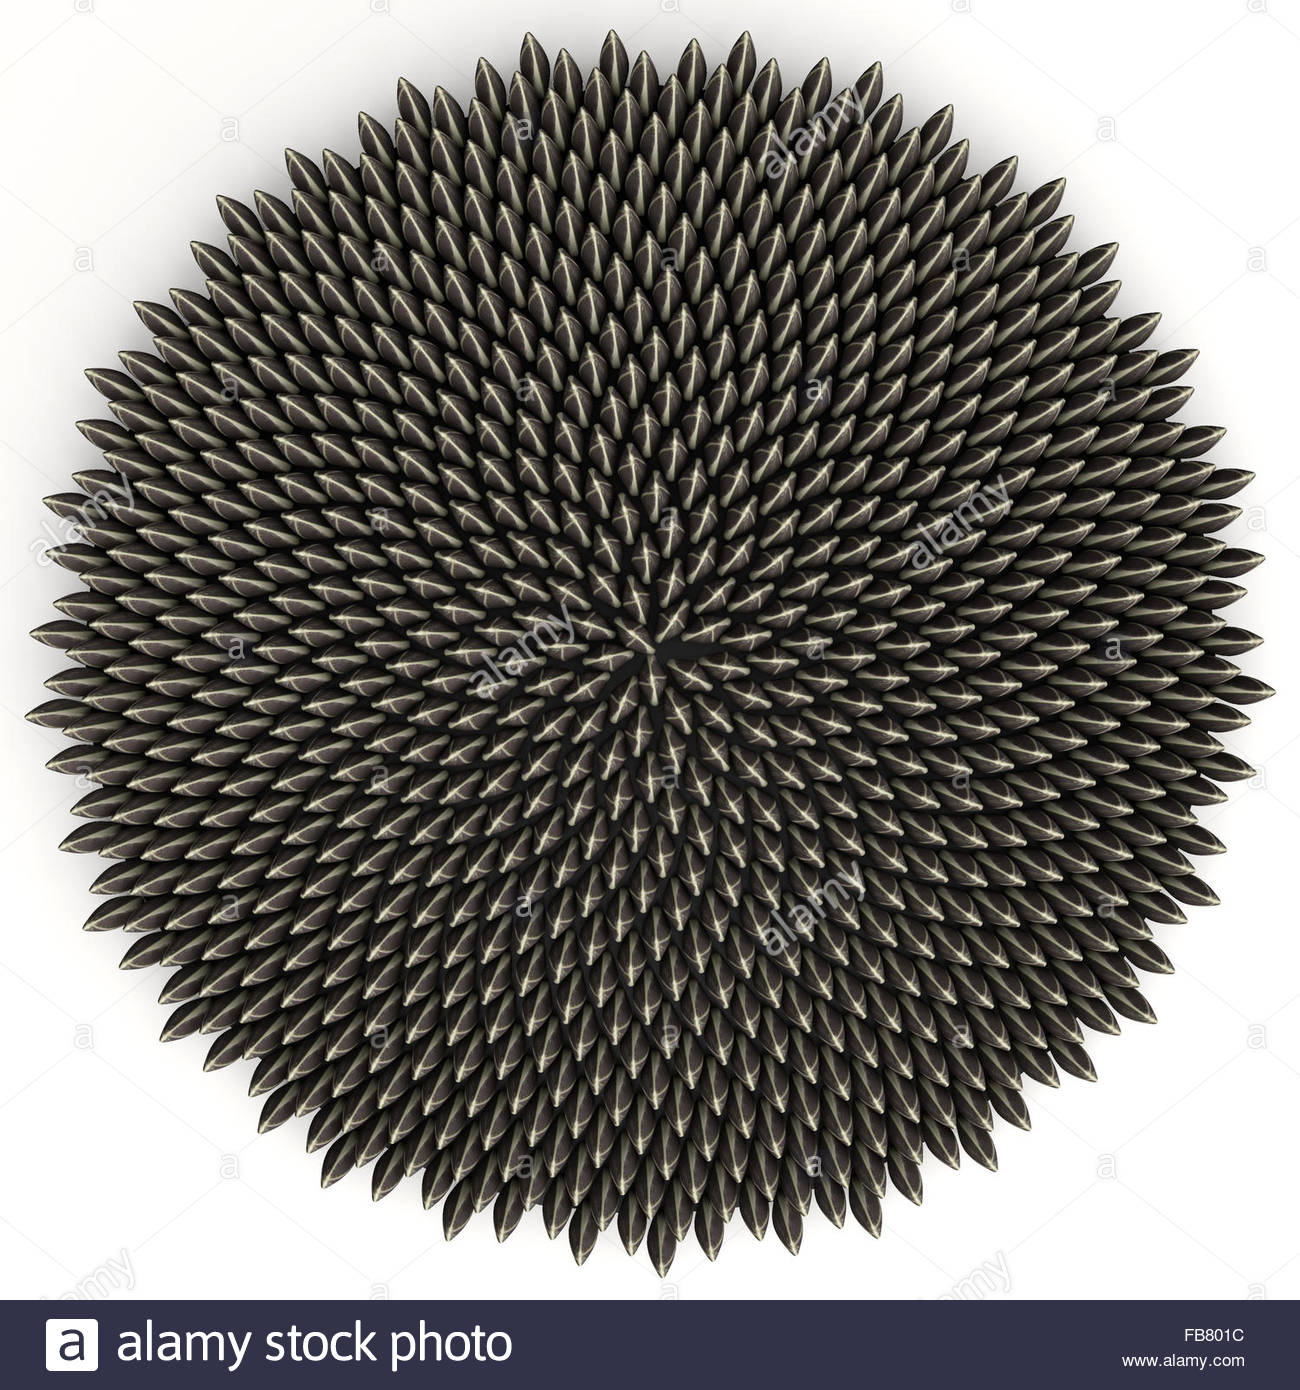 Royalty free clipart illustration of a 3d sunflower seed fibonacci golden ratio circle, on a white background.